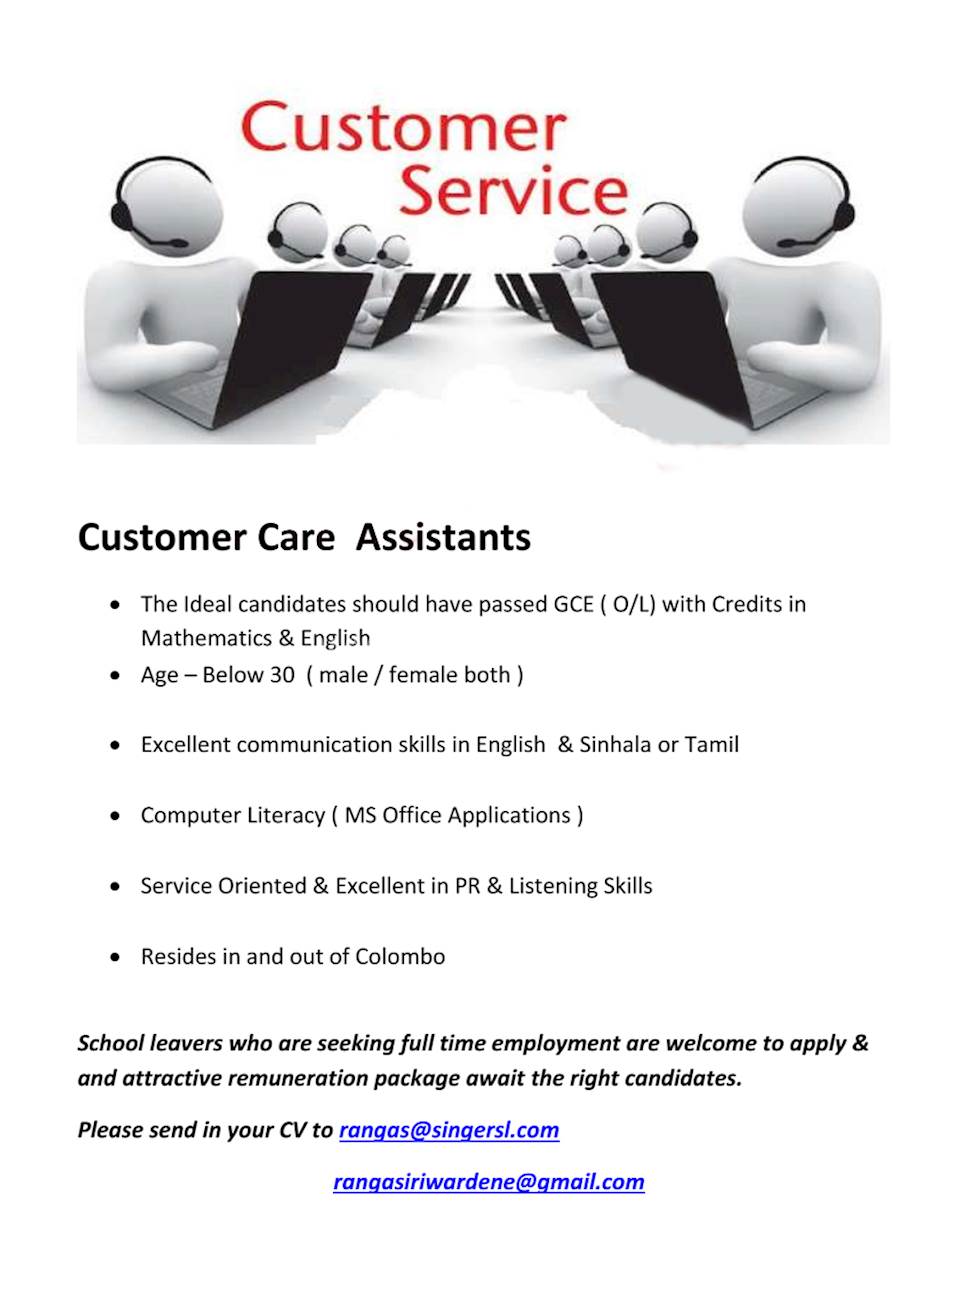 Customer Care Assistants